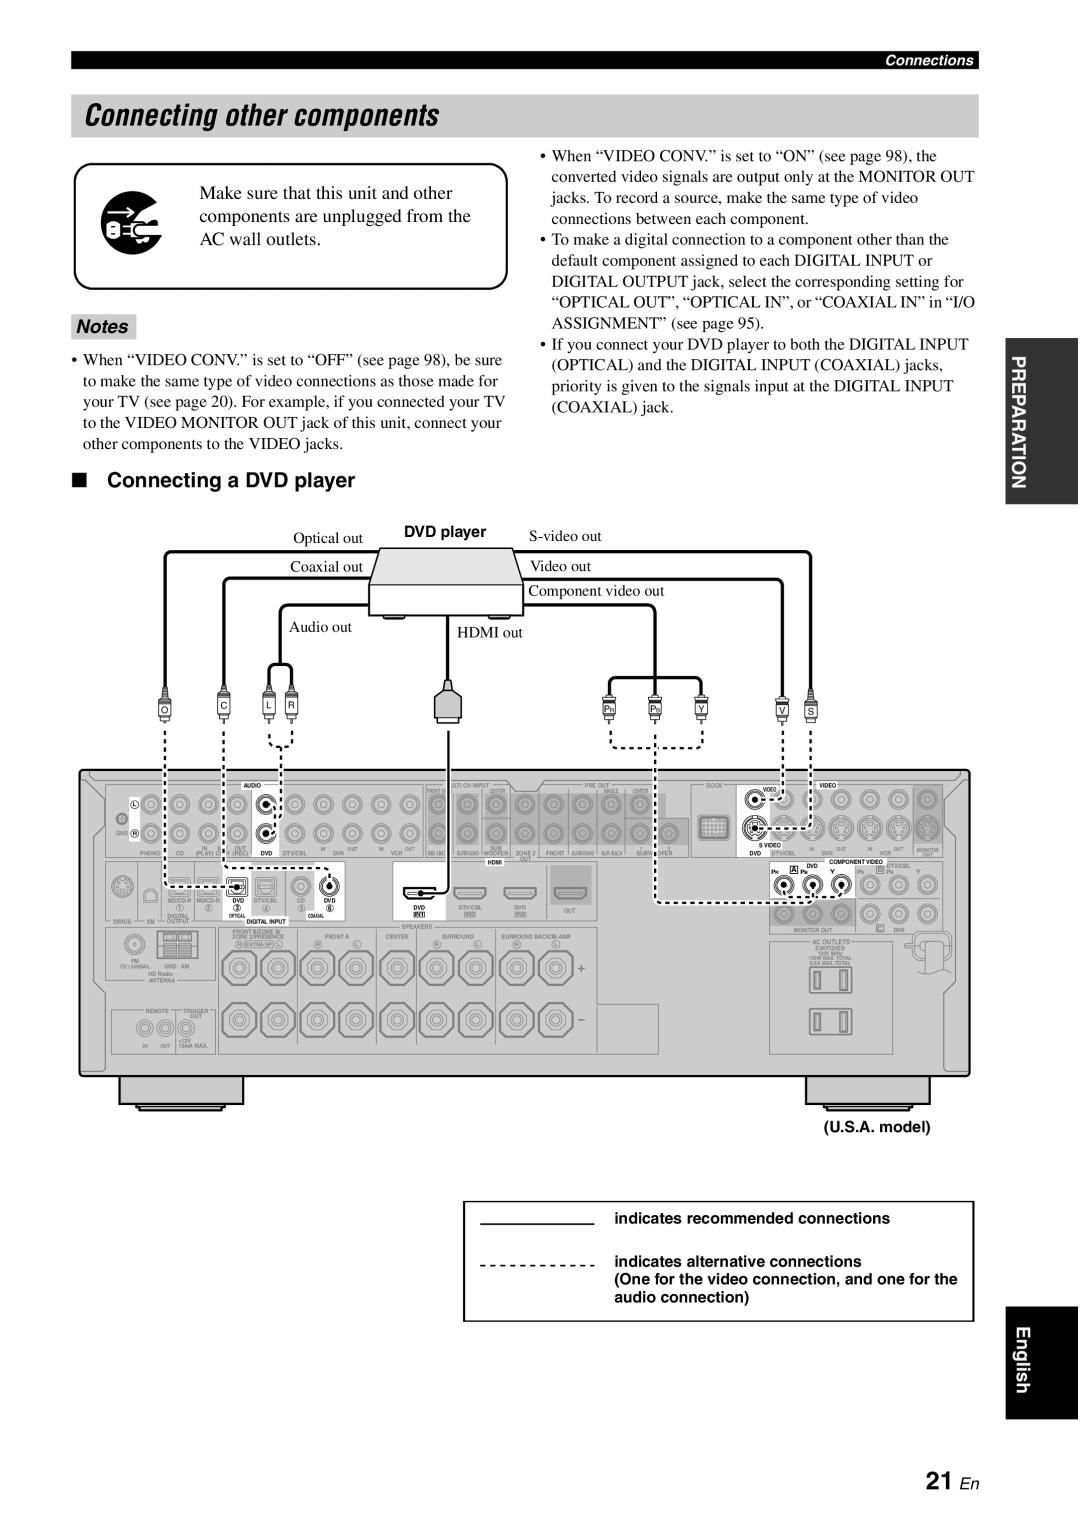 Yamaha HTR-6180 owner manual Connecting other components, 21 En, Connecting a DVD player 